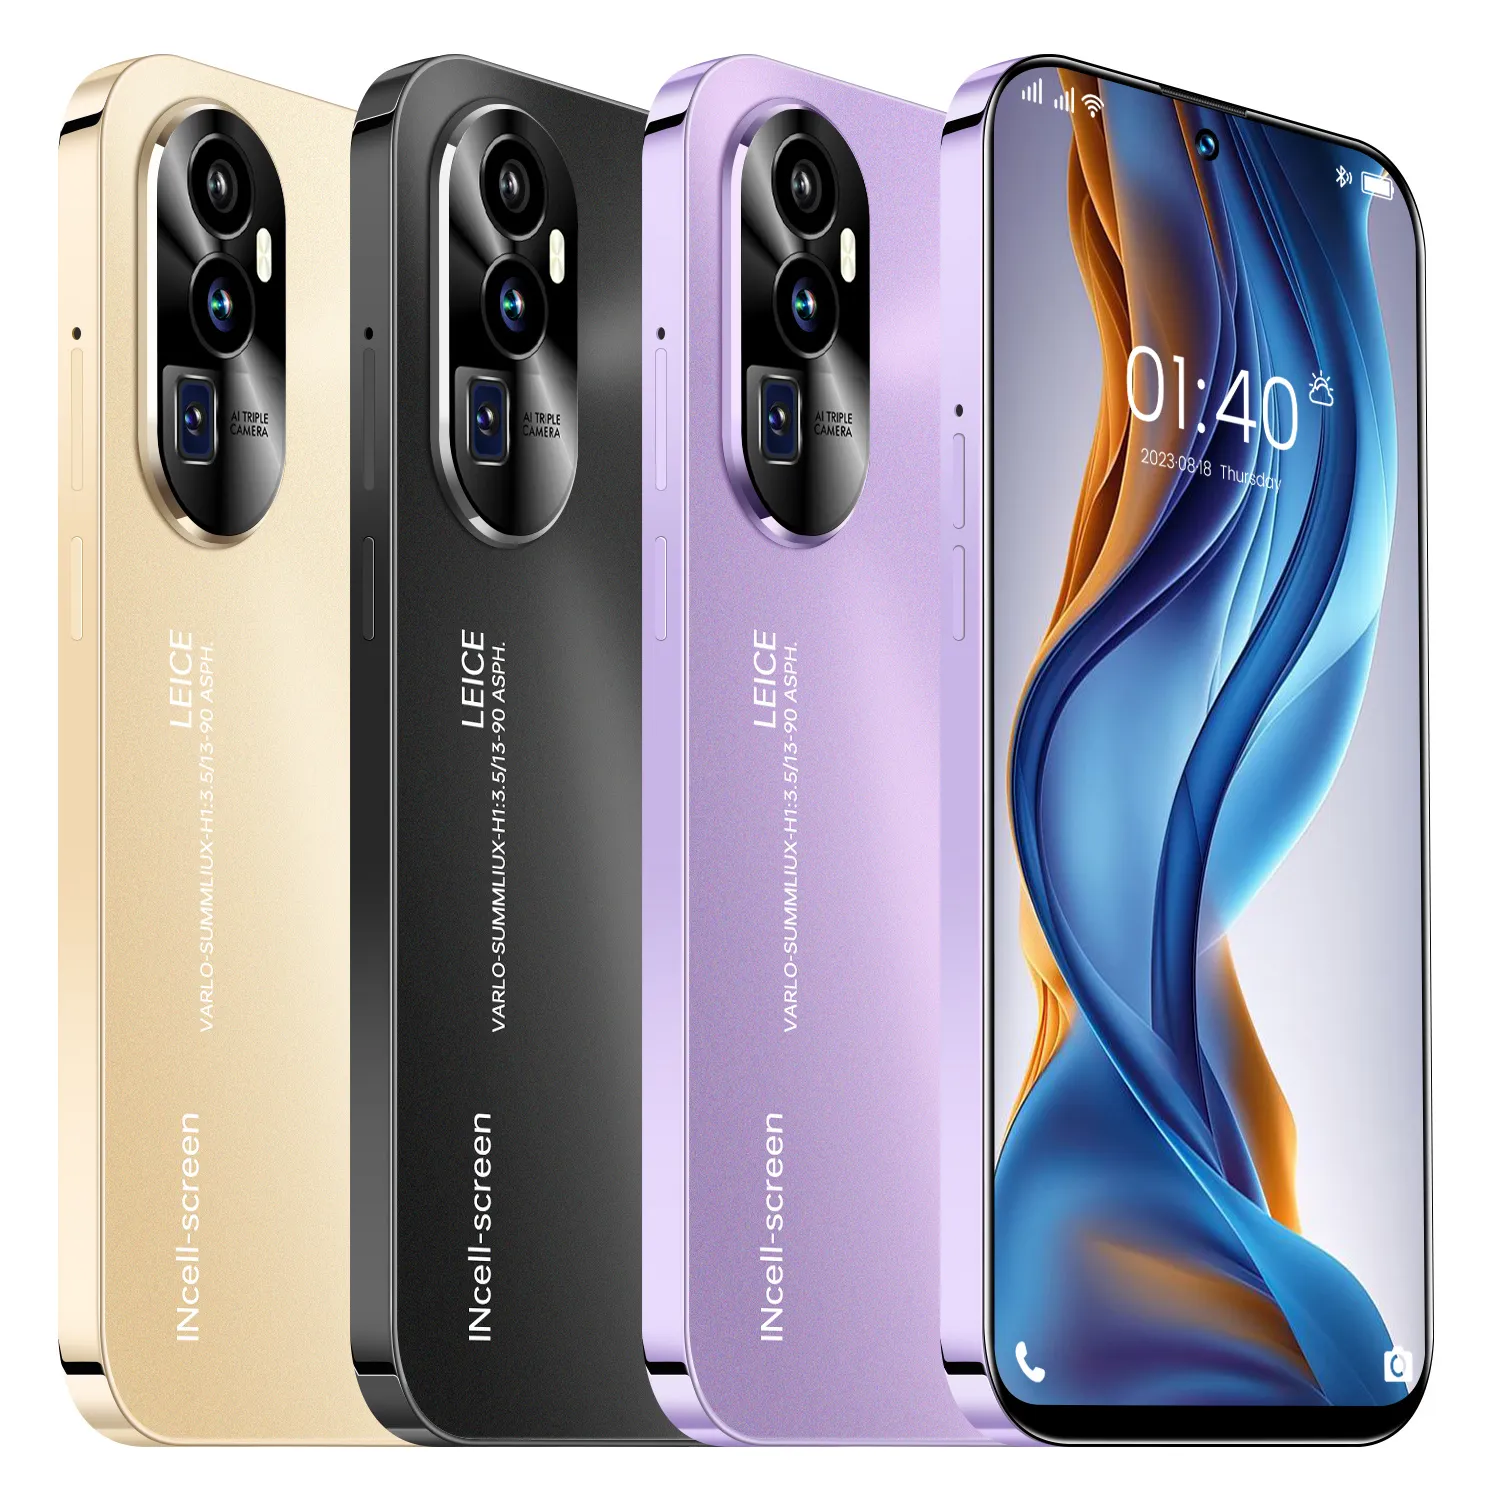 Cell Phone Huawie Reno10 pro ultra-fat 5G network 8 8G 256B torage high definition creen let you enjoy the fun of modern technology in the trend of the